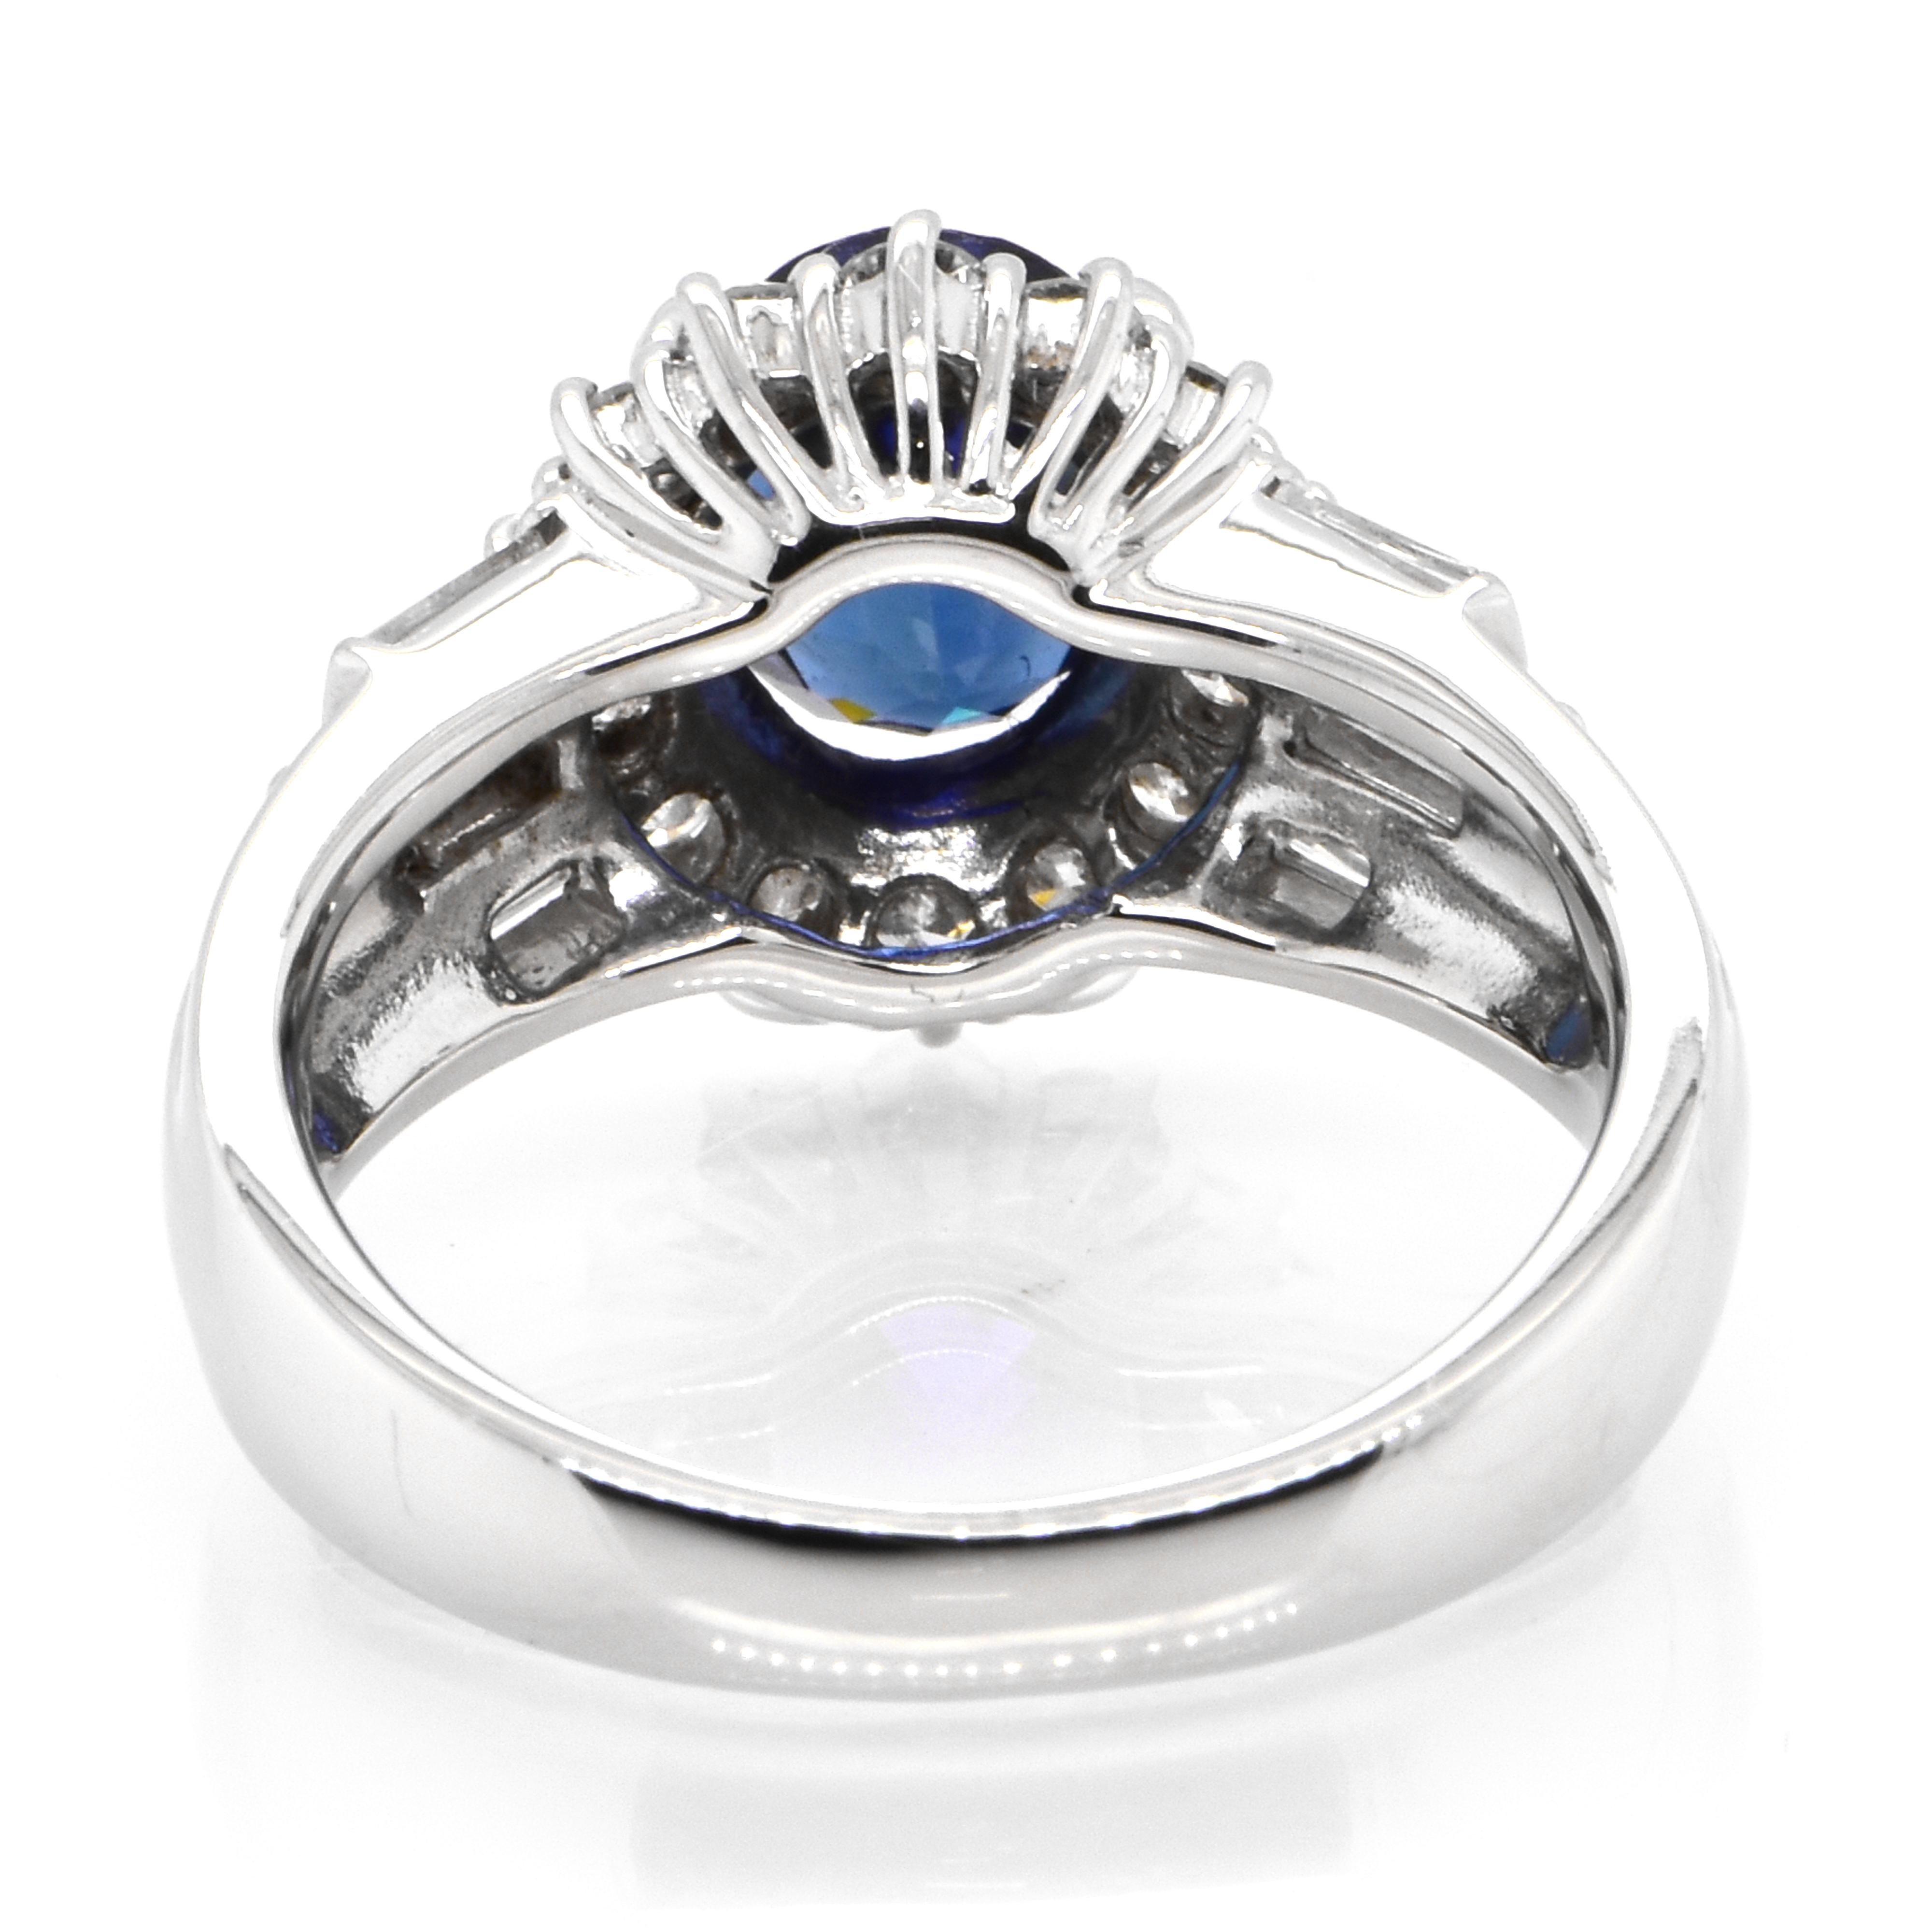 Women's 1.52 Carat Natural Royal Blue Color Sapphire and Diamond Ring Made in Platinum For Sale